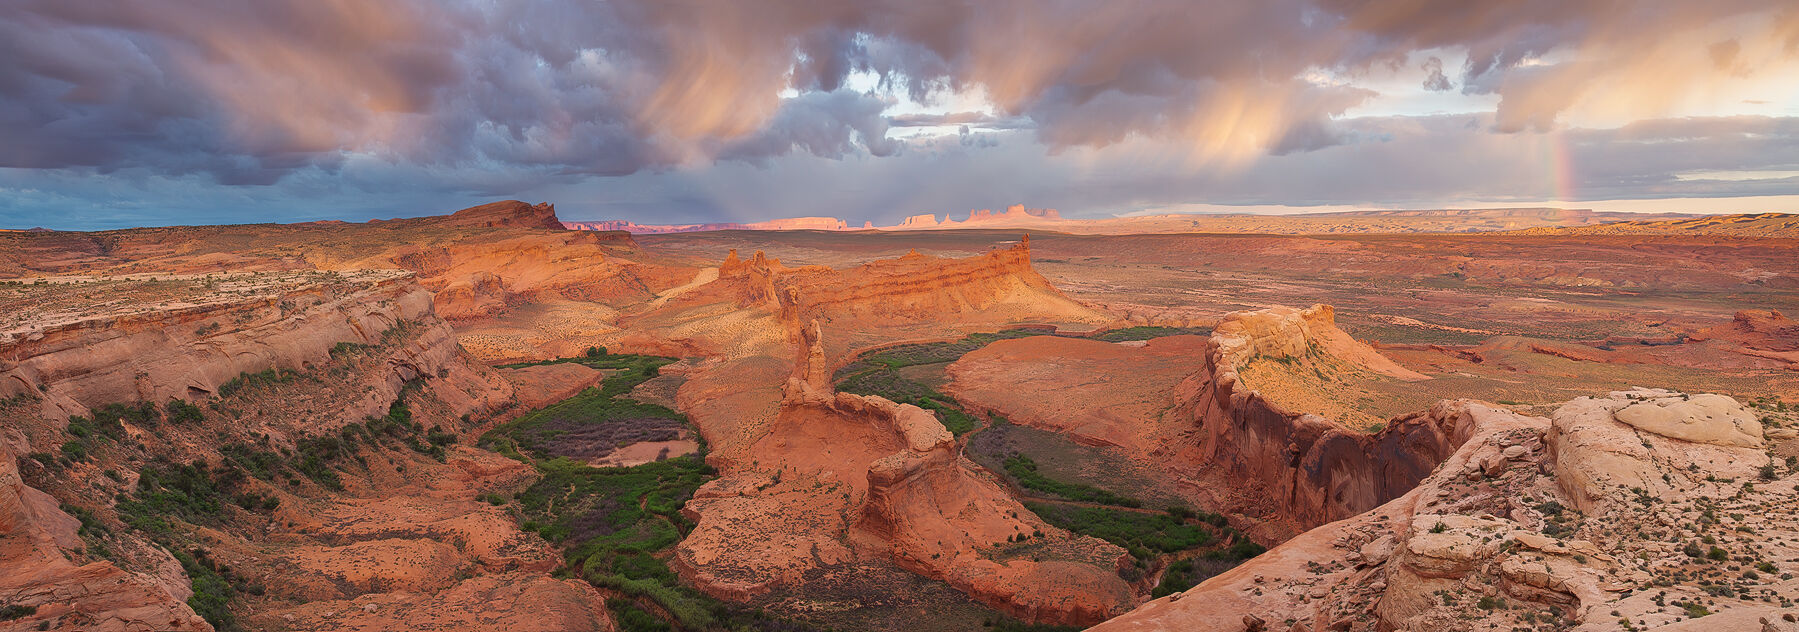 Ridges stand above the lush green floor of this desert scene clearing storm clouds in the distance and and a rainbow as the sun peers through the clouds.